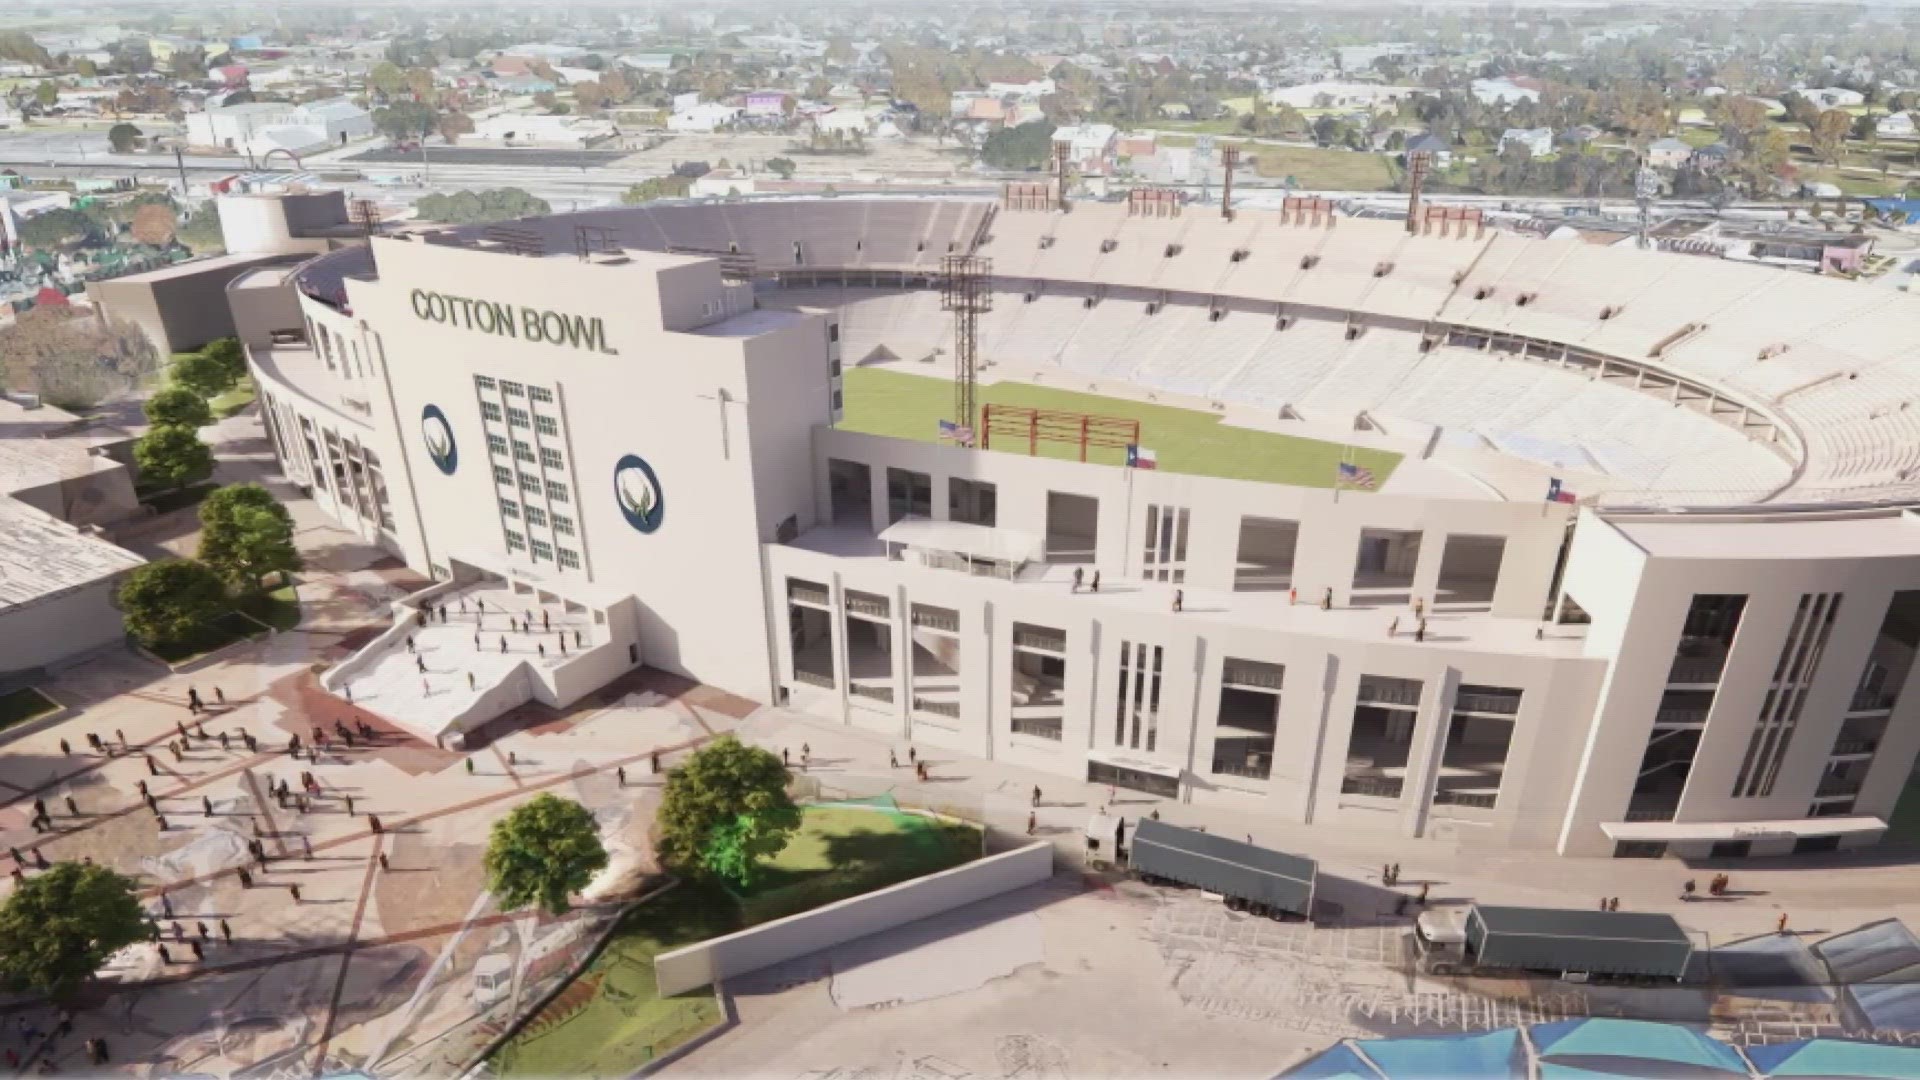 Renovations to Cotton Bowl Stadium are expected to cost about $140 million.